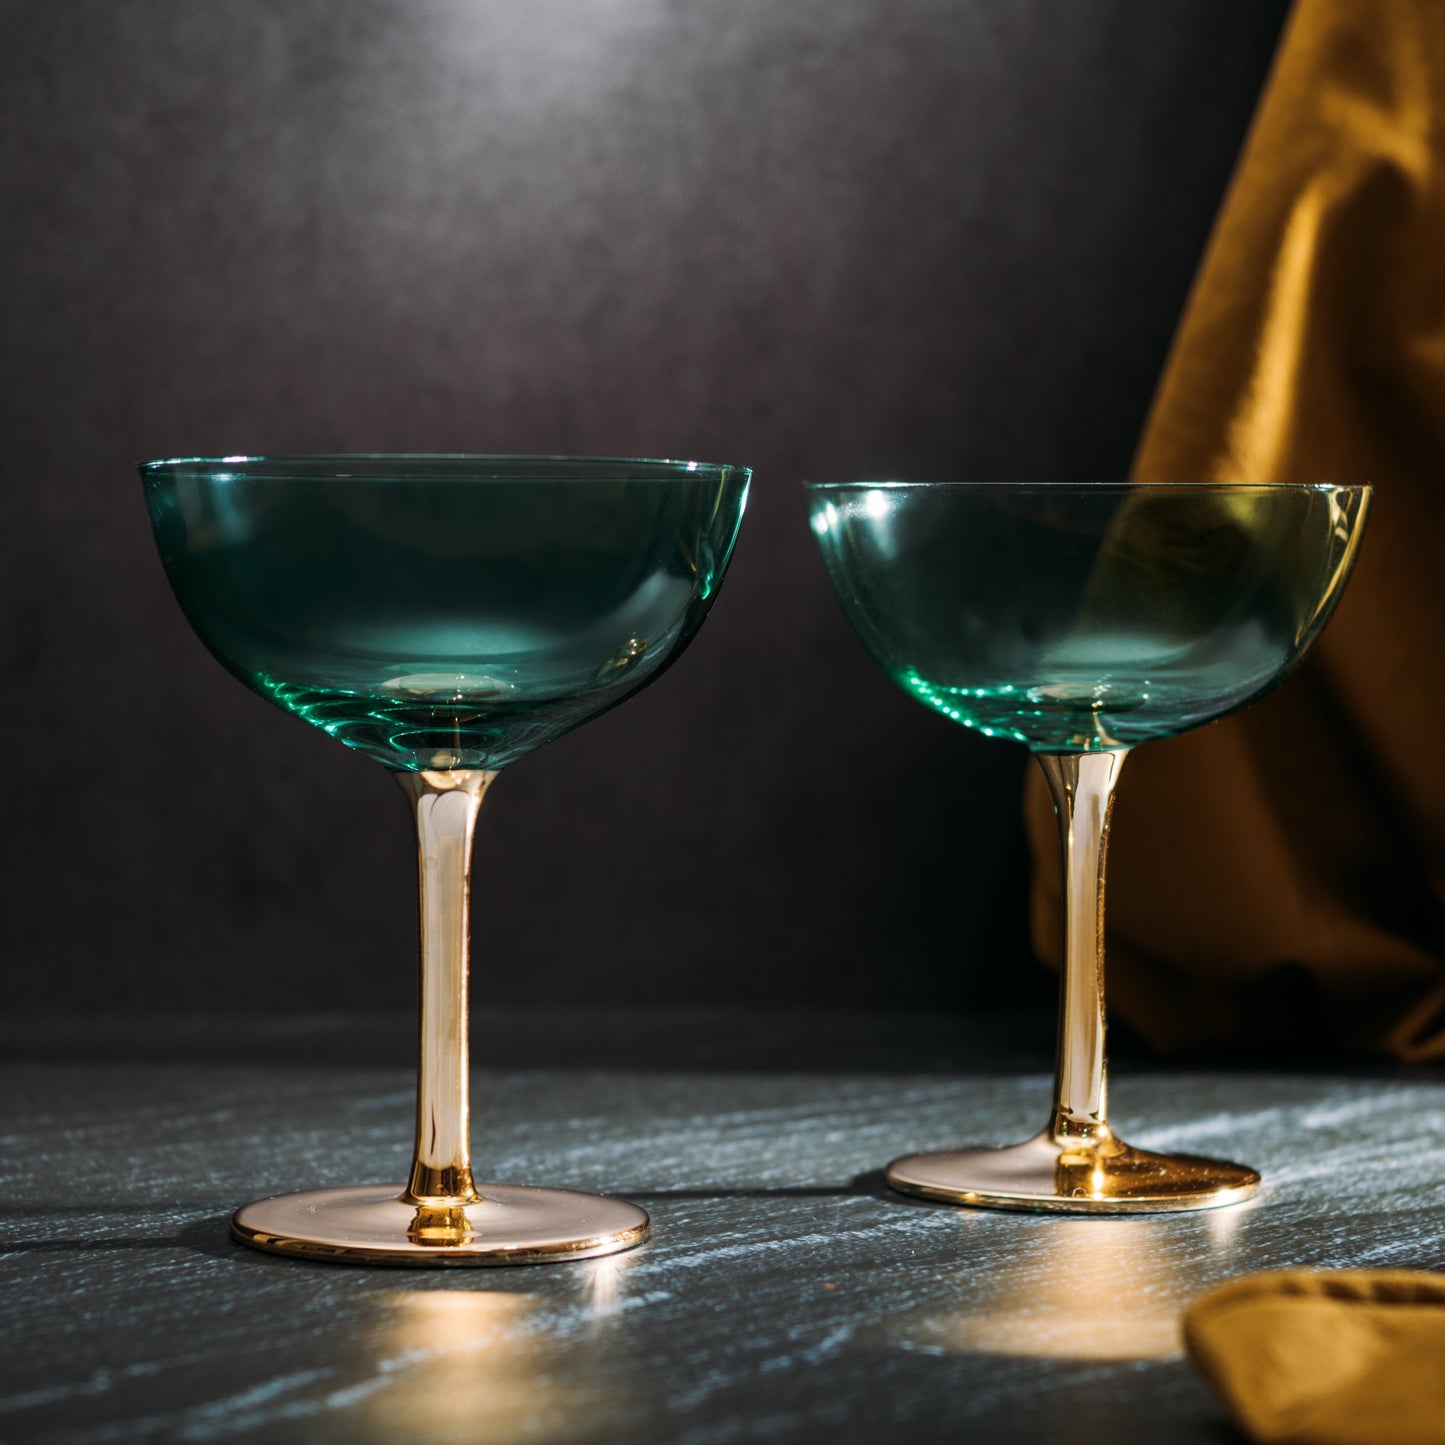 Colored Coupe Art Deco Glasses, Gold | Set of 2 | 12 oz Classic Cocktail Glassware for Champagne, Martini, Manhattan, Sidecar, Crystal Speakeasy Style Goblets Stems, Vintage Blue, Teal, Green by The Wine Savant